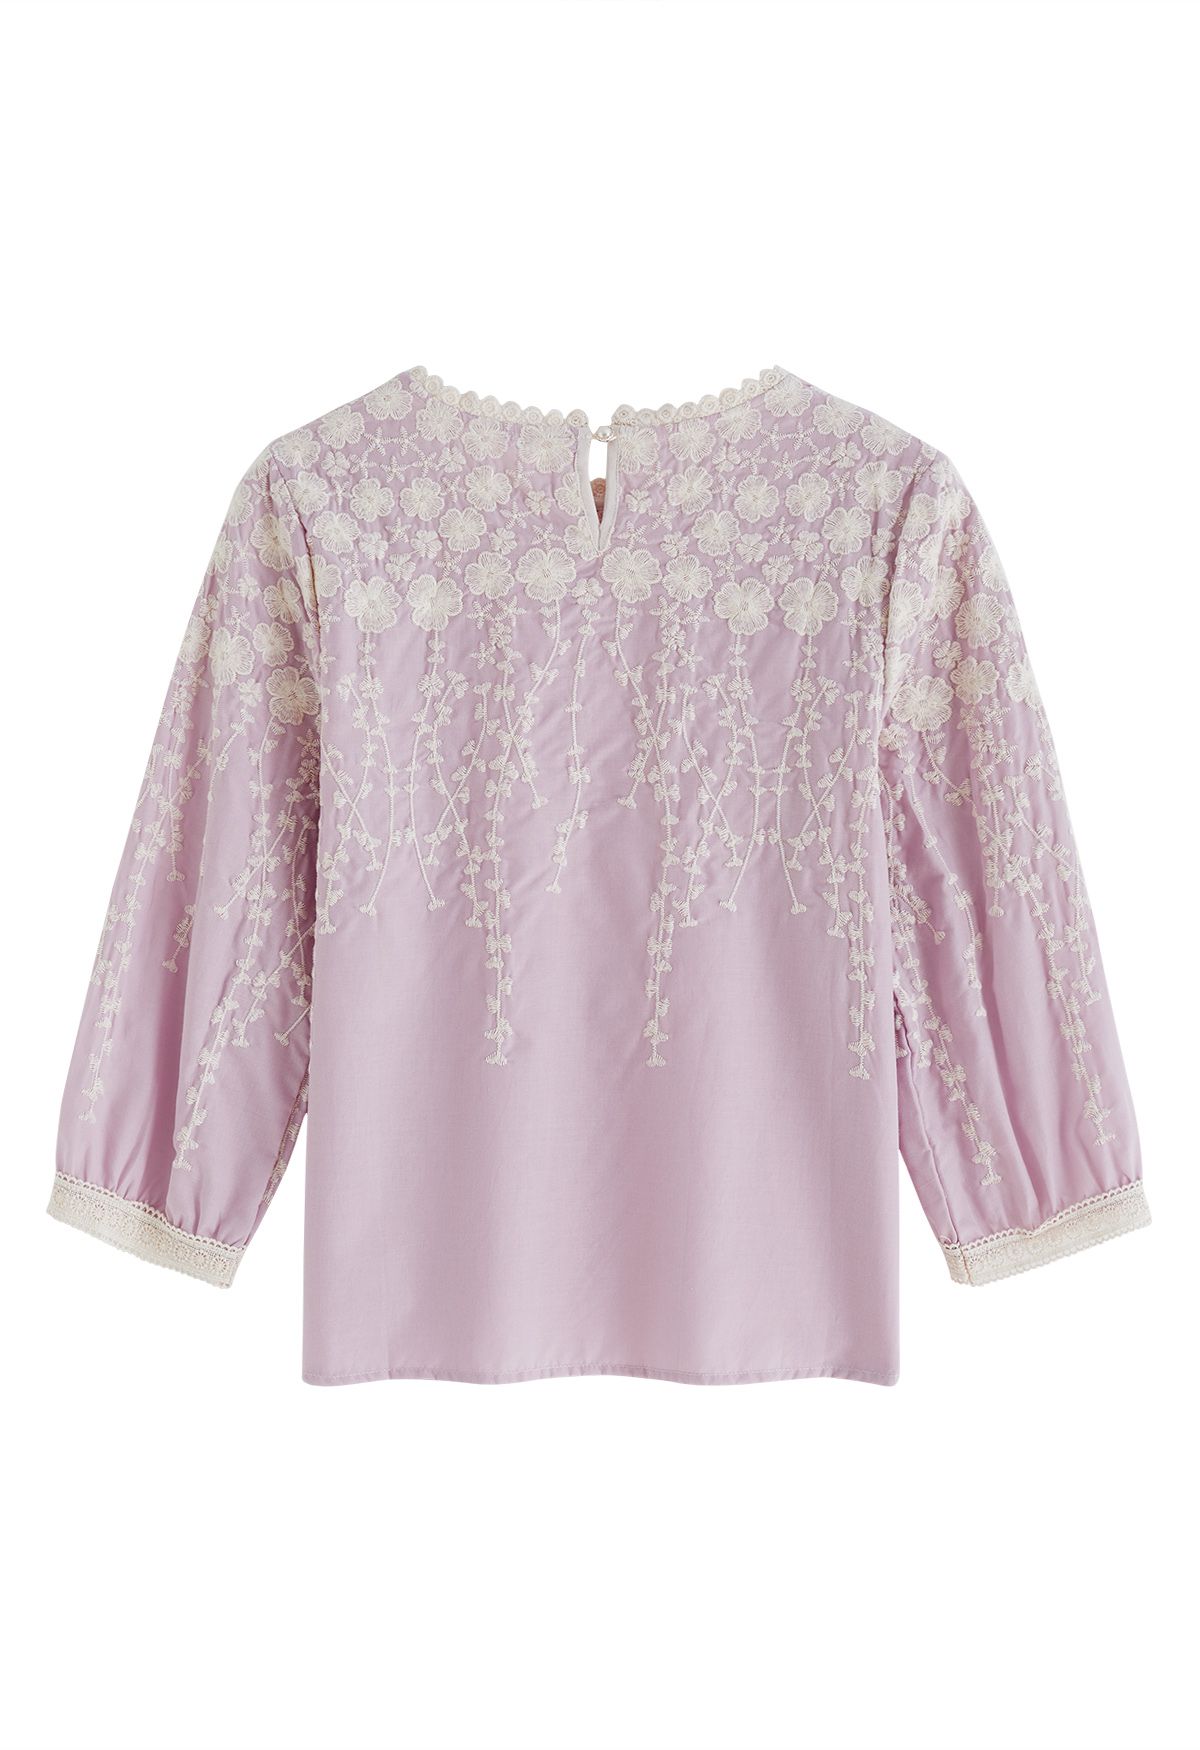 Clover Branch Embroidered Dolly Top in Lilac